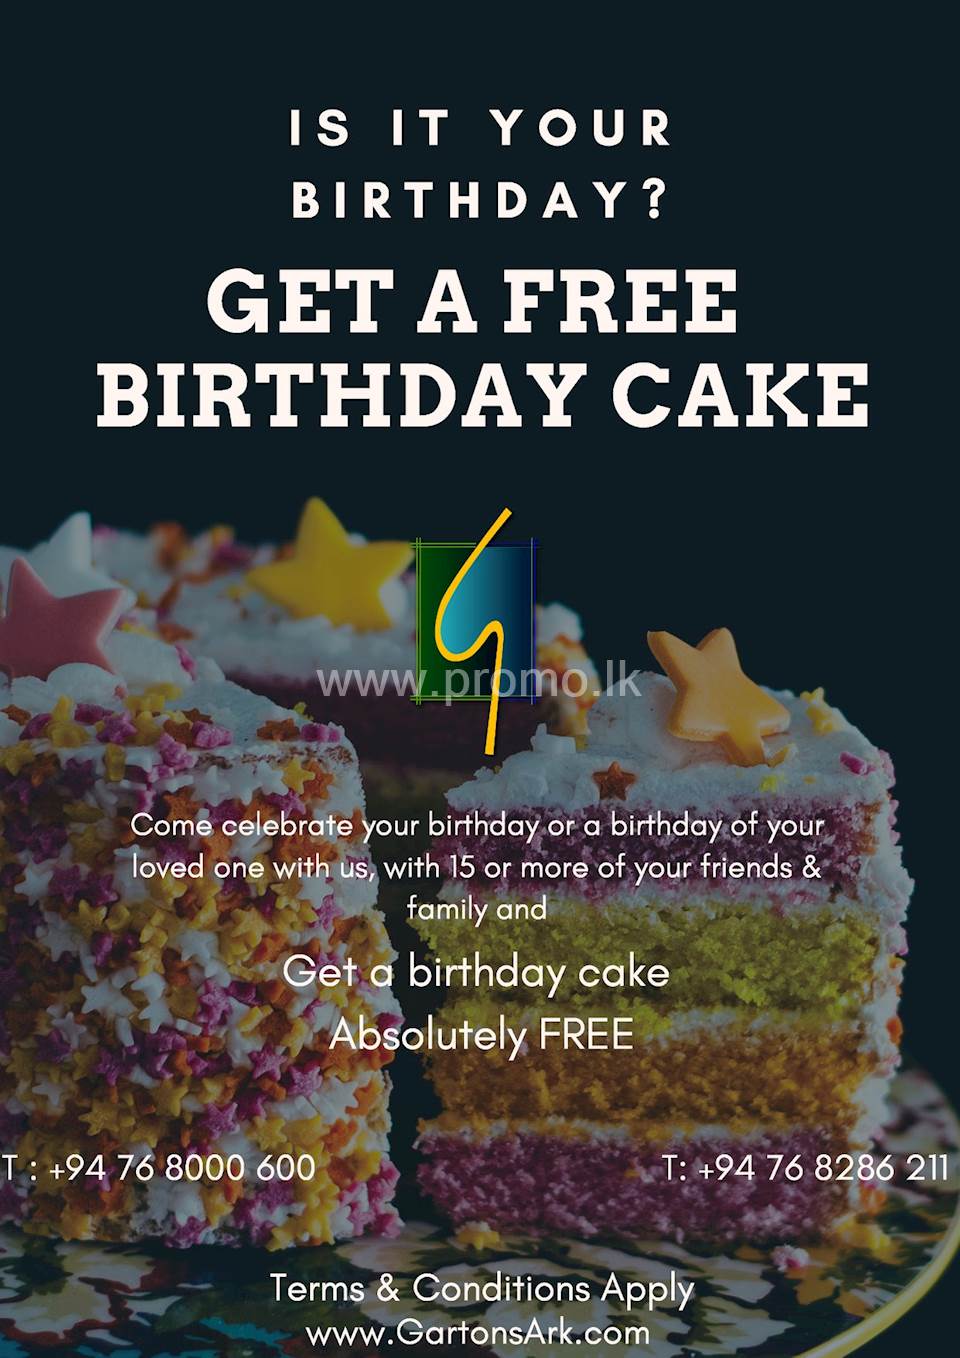 Thanks for the free birthday cake offer to my kids. It is lovely! - Picture  of Hong Kong Ocean Park Marriott Hotel - Tripadvisor